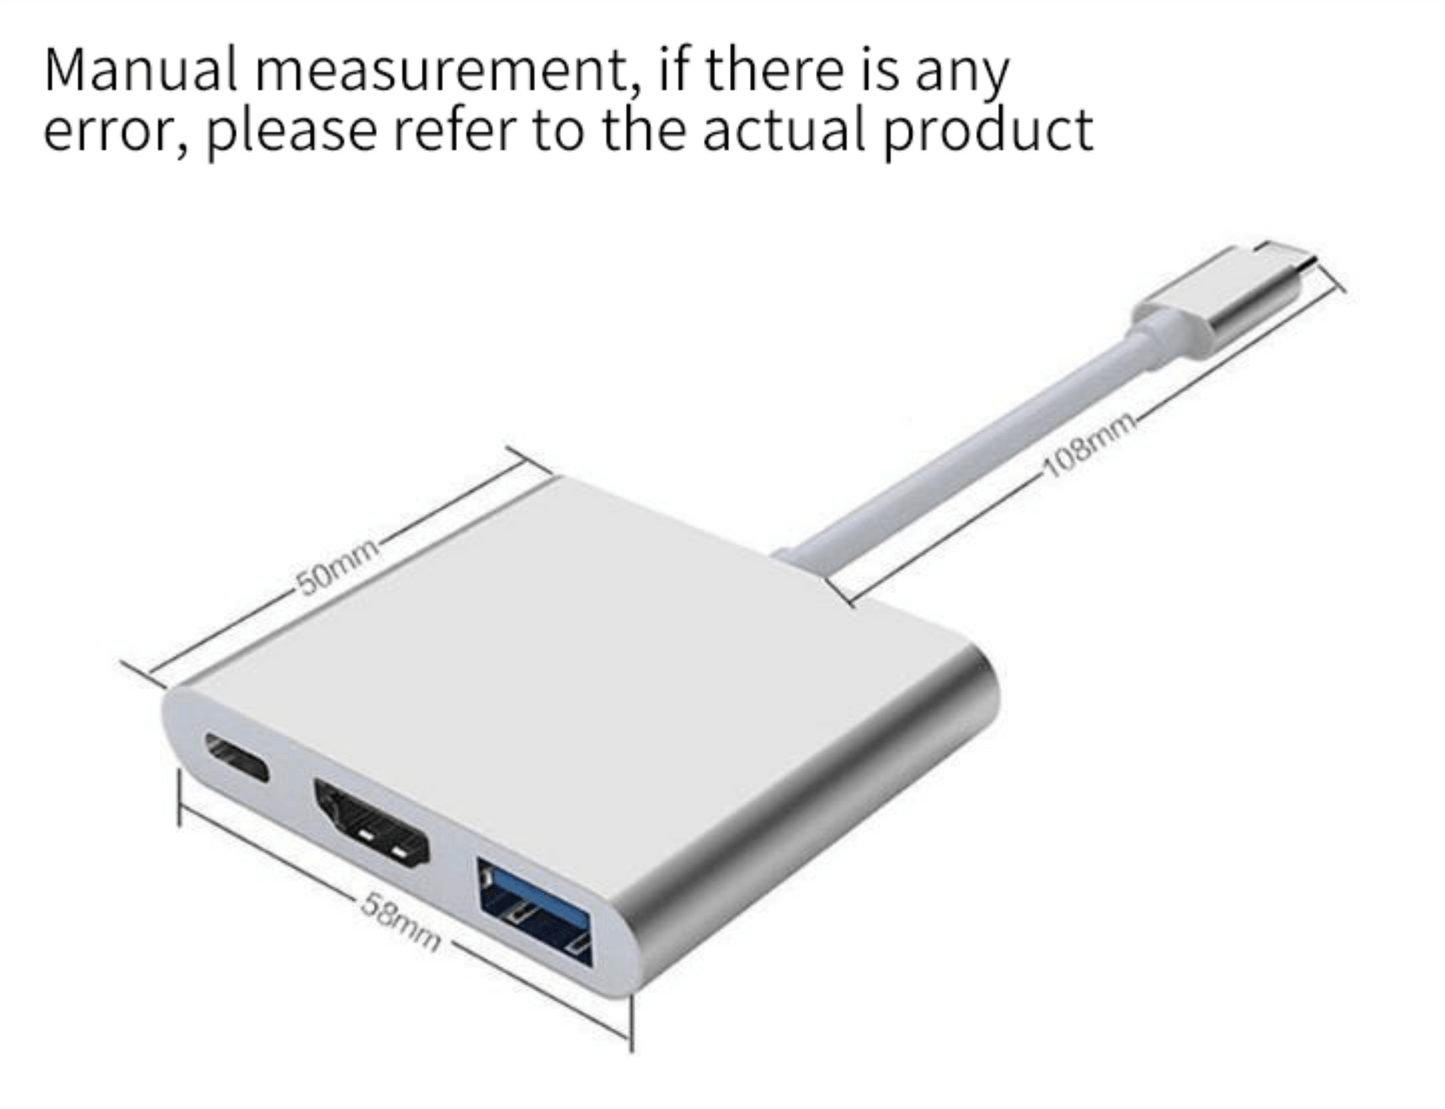 Type-C to HDMI / Type-C/ USB 3.0 Multiport Adapter